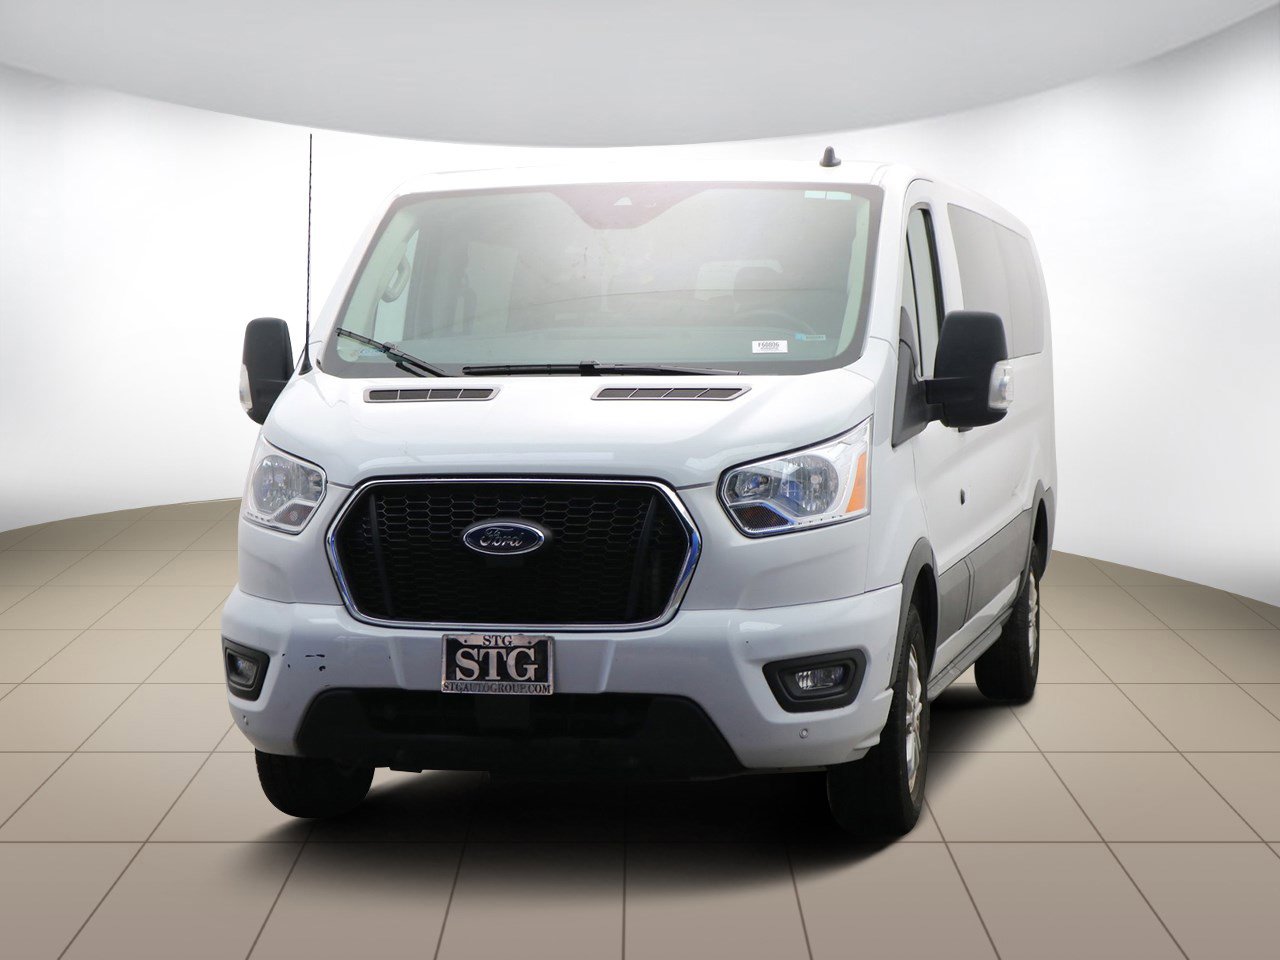 Pre-Owned 2021 Ford Transit-350 XLT Passenger Van in Montclair #F60806 |  STG Auto Group